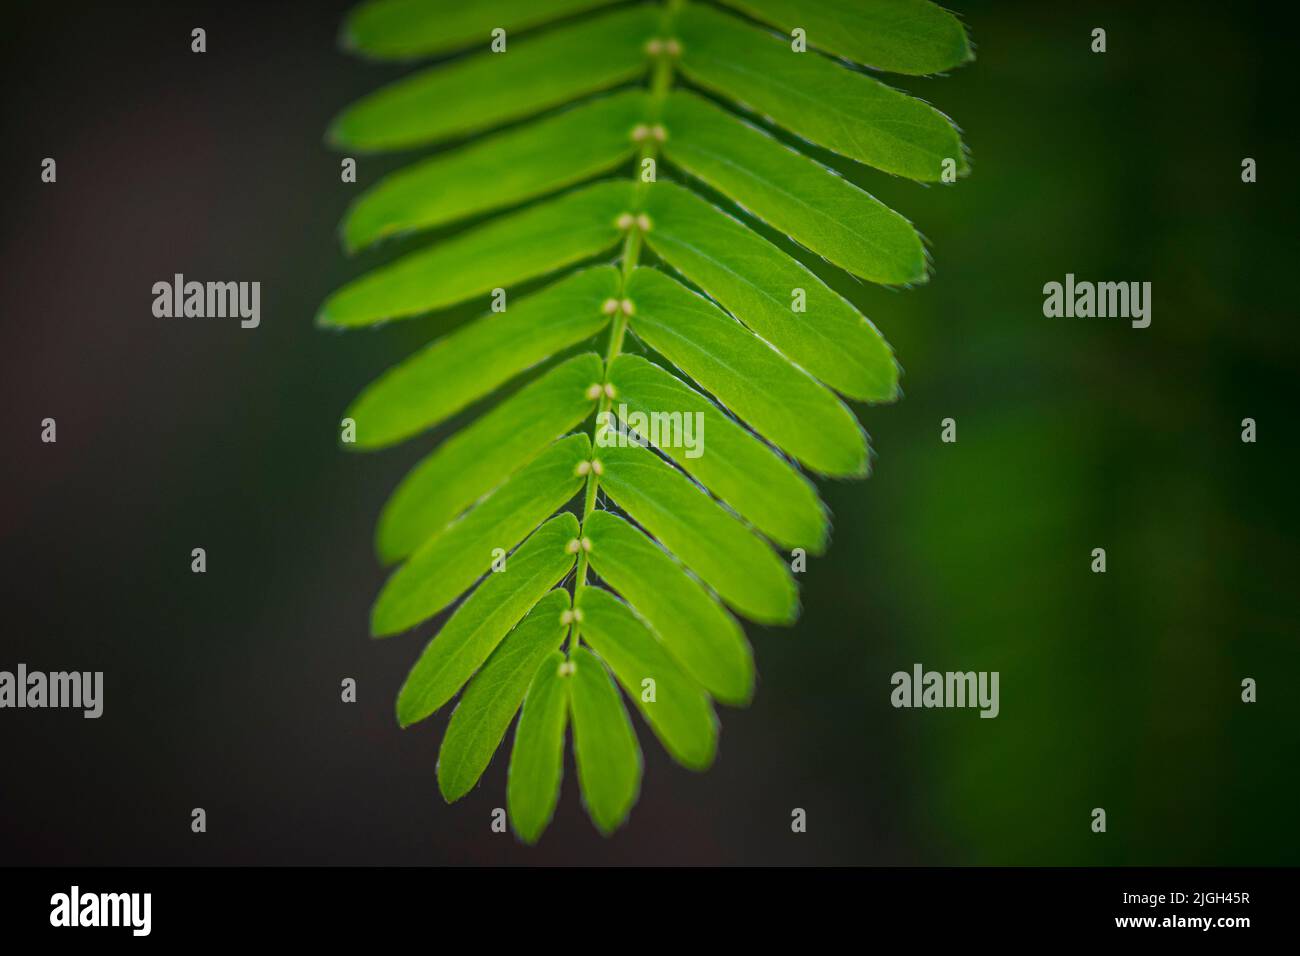 Close-up shot of the leaf of a mimosa pudica, also called sensitive plant, sleepy plant, action plant, touch-me-not or shameplant Stock Photo